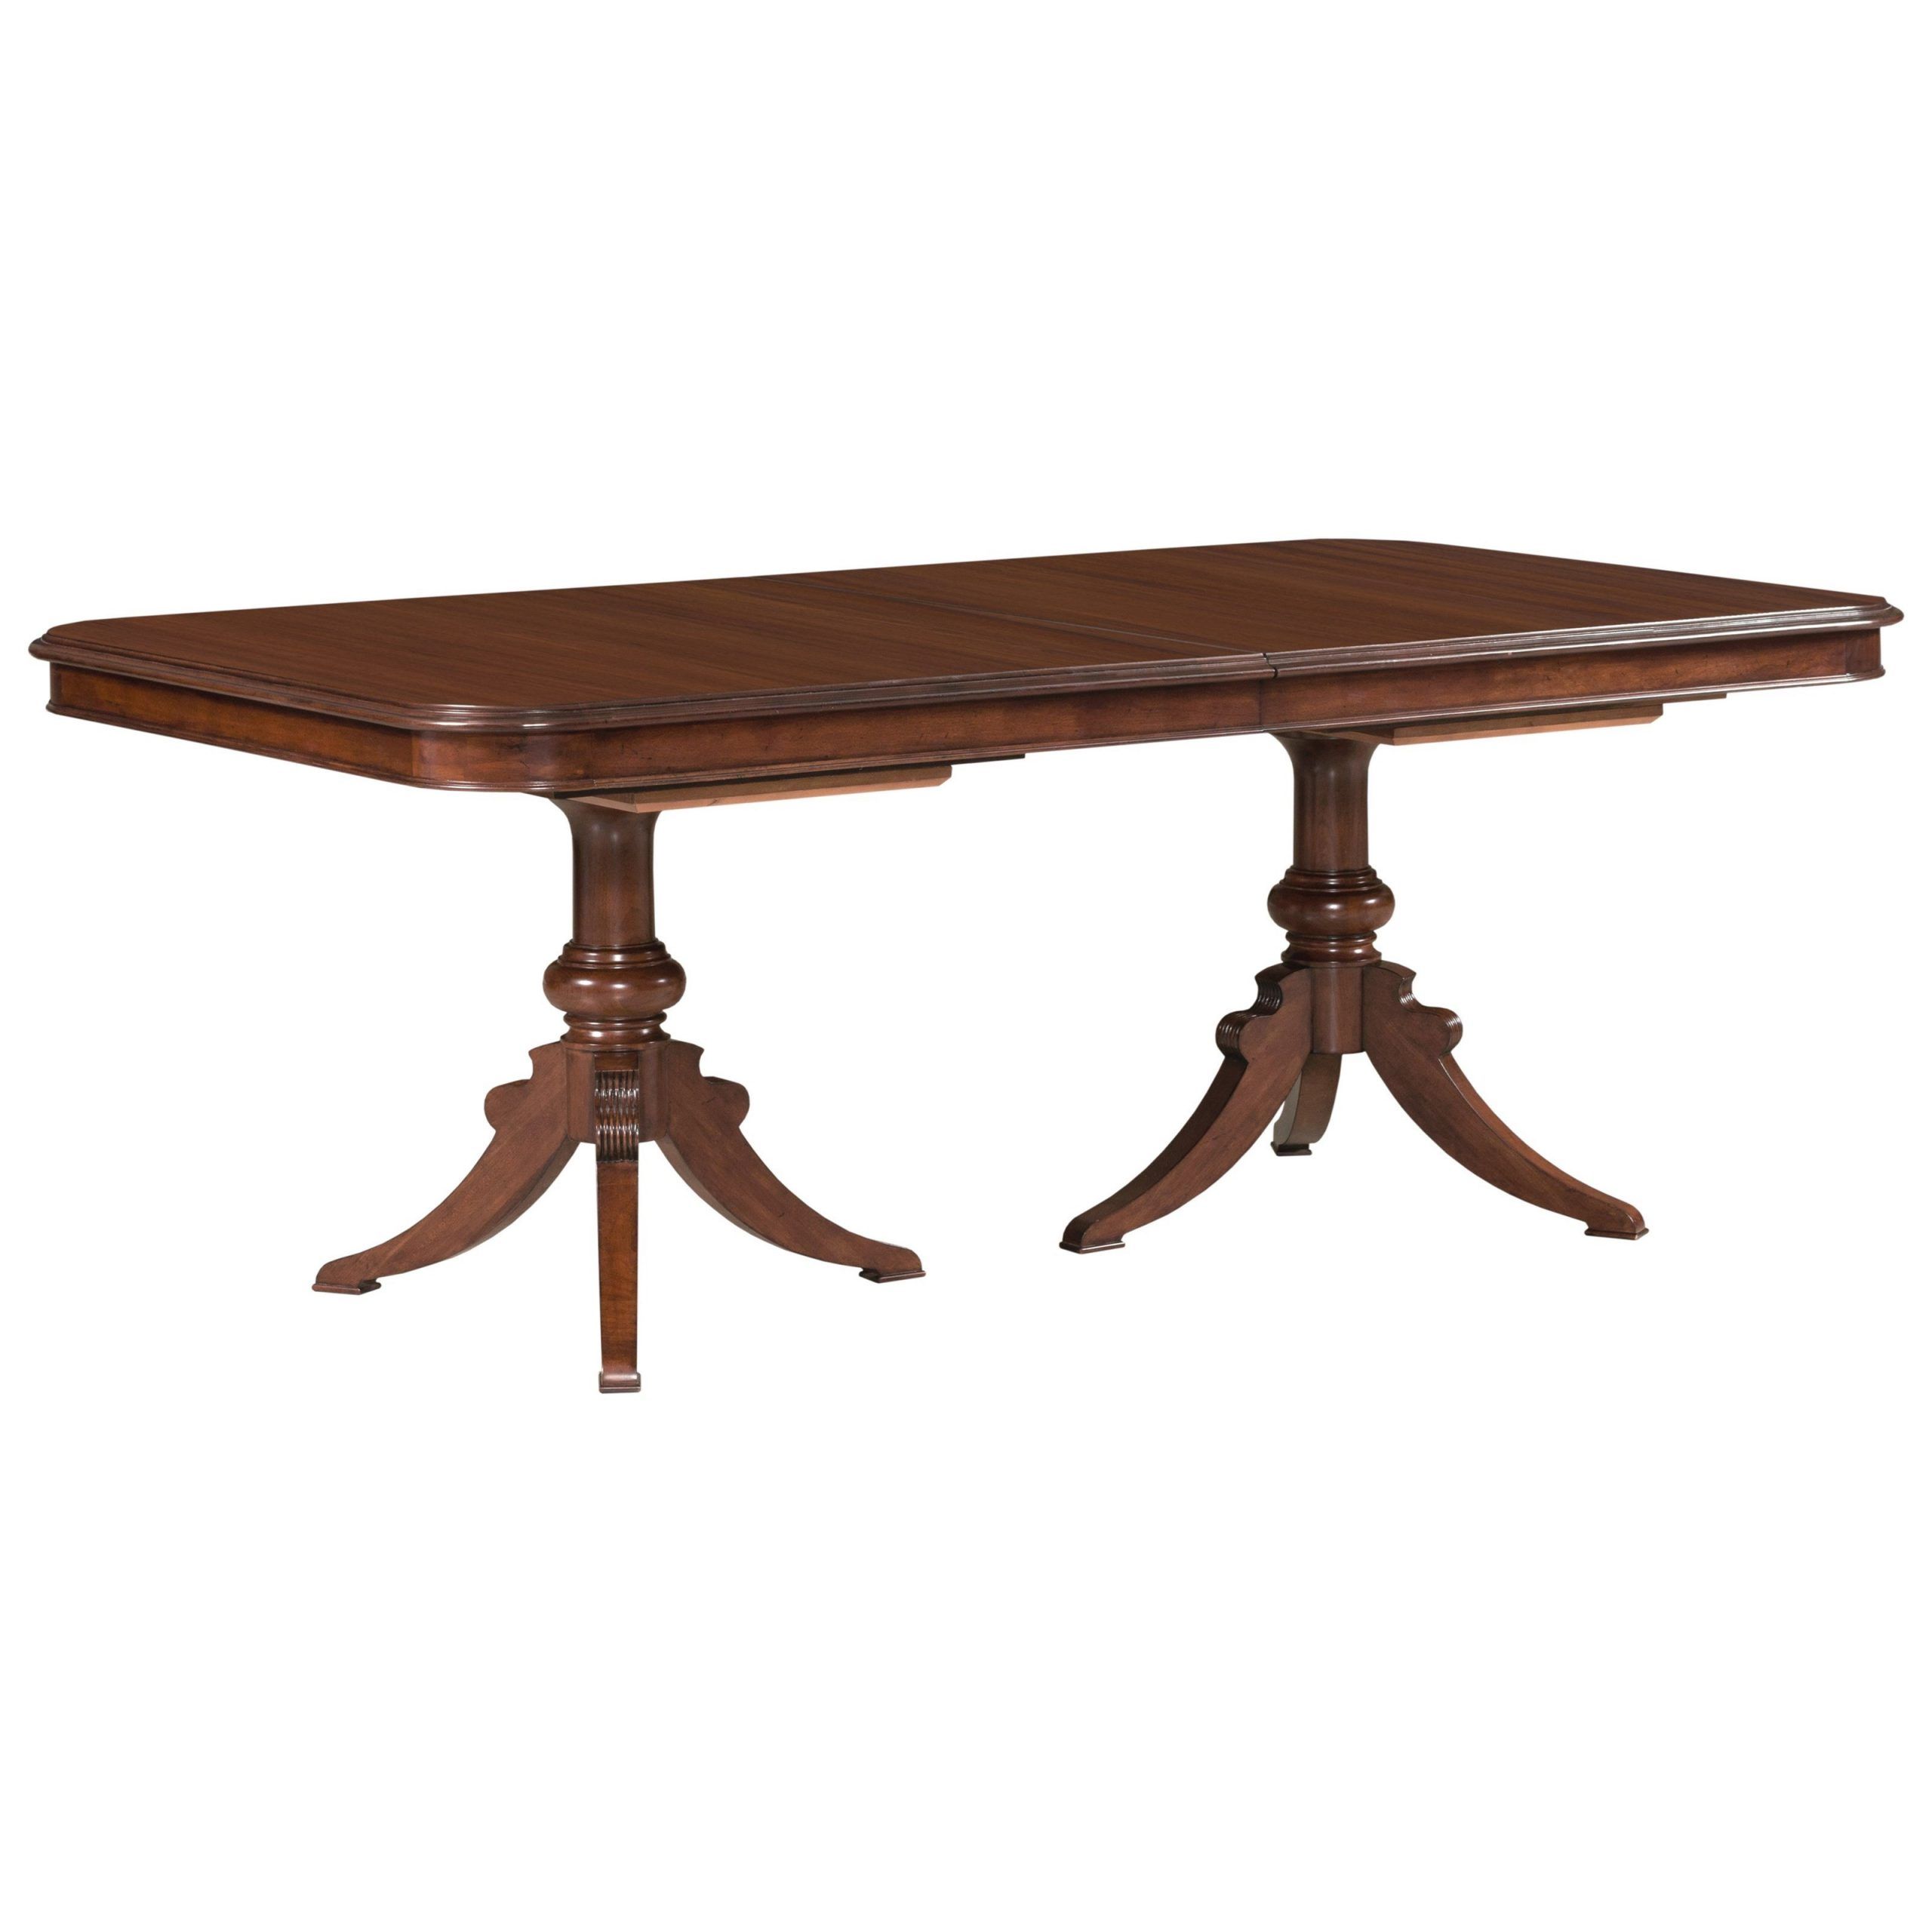 Kincaid Furniture Hadleigh Traditional Double Pedestal Regarding Recent Dawson Pedestal Dining Tables (View 16 of 25)